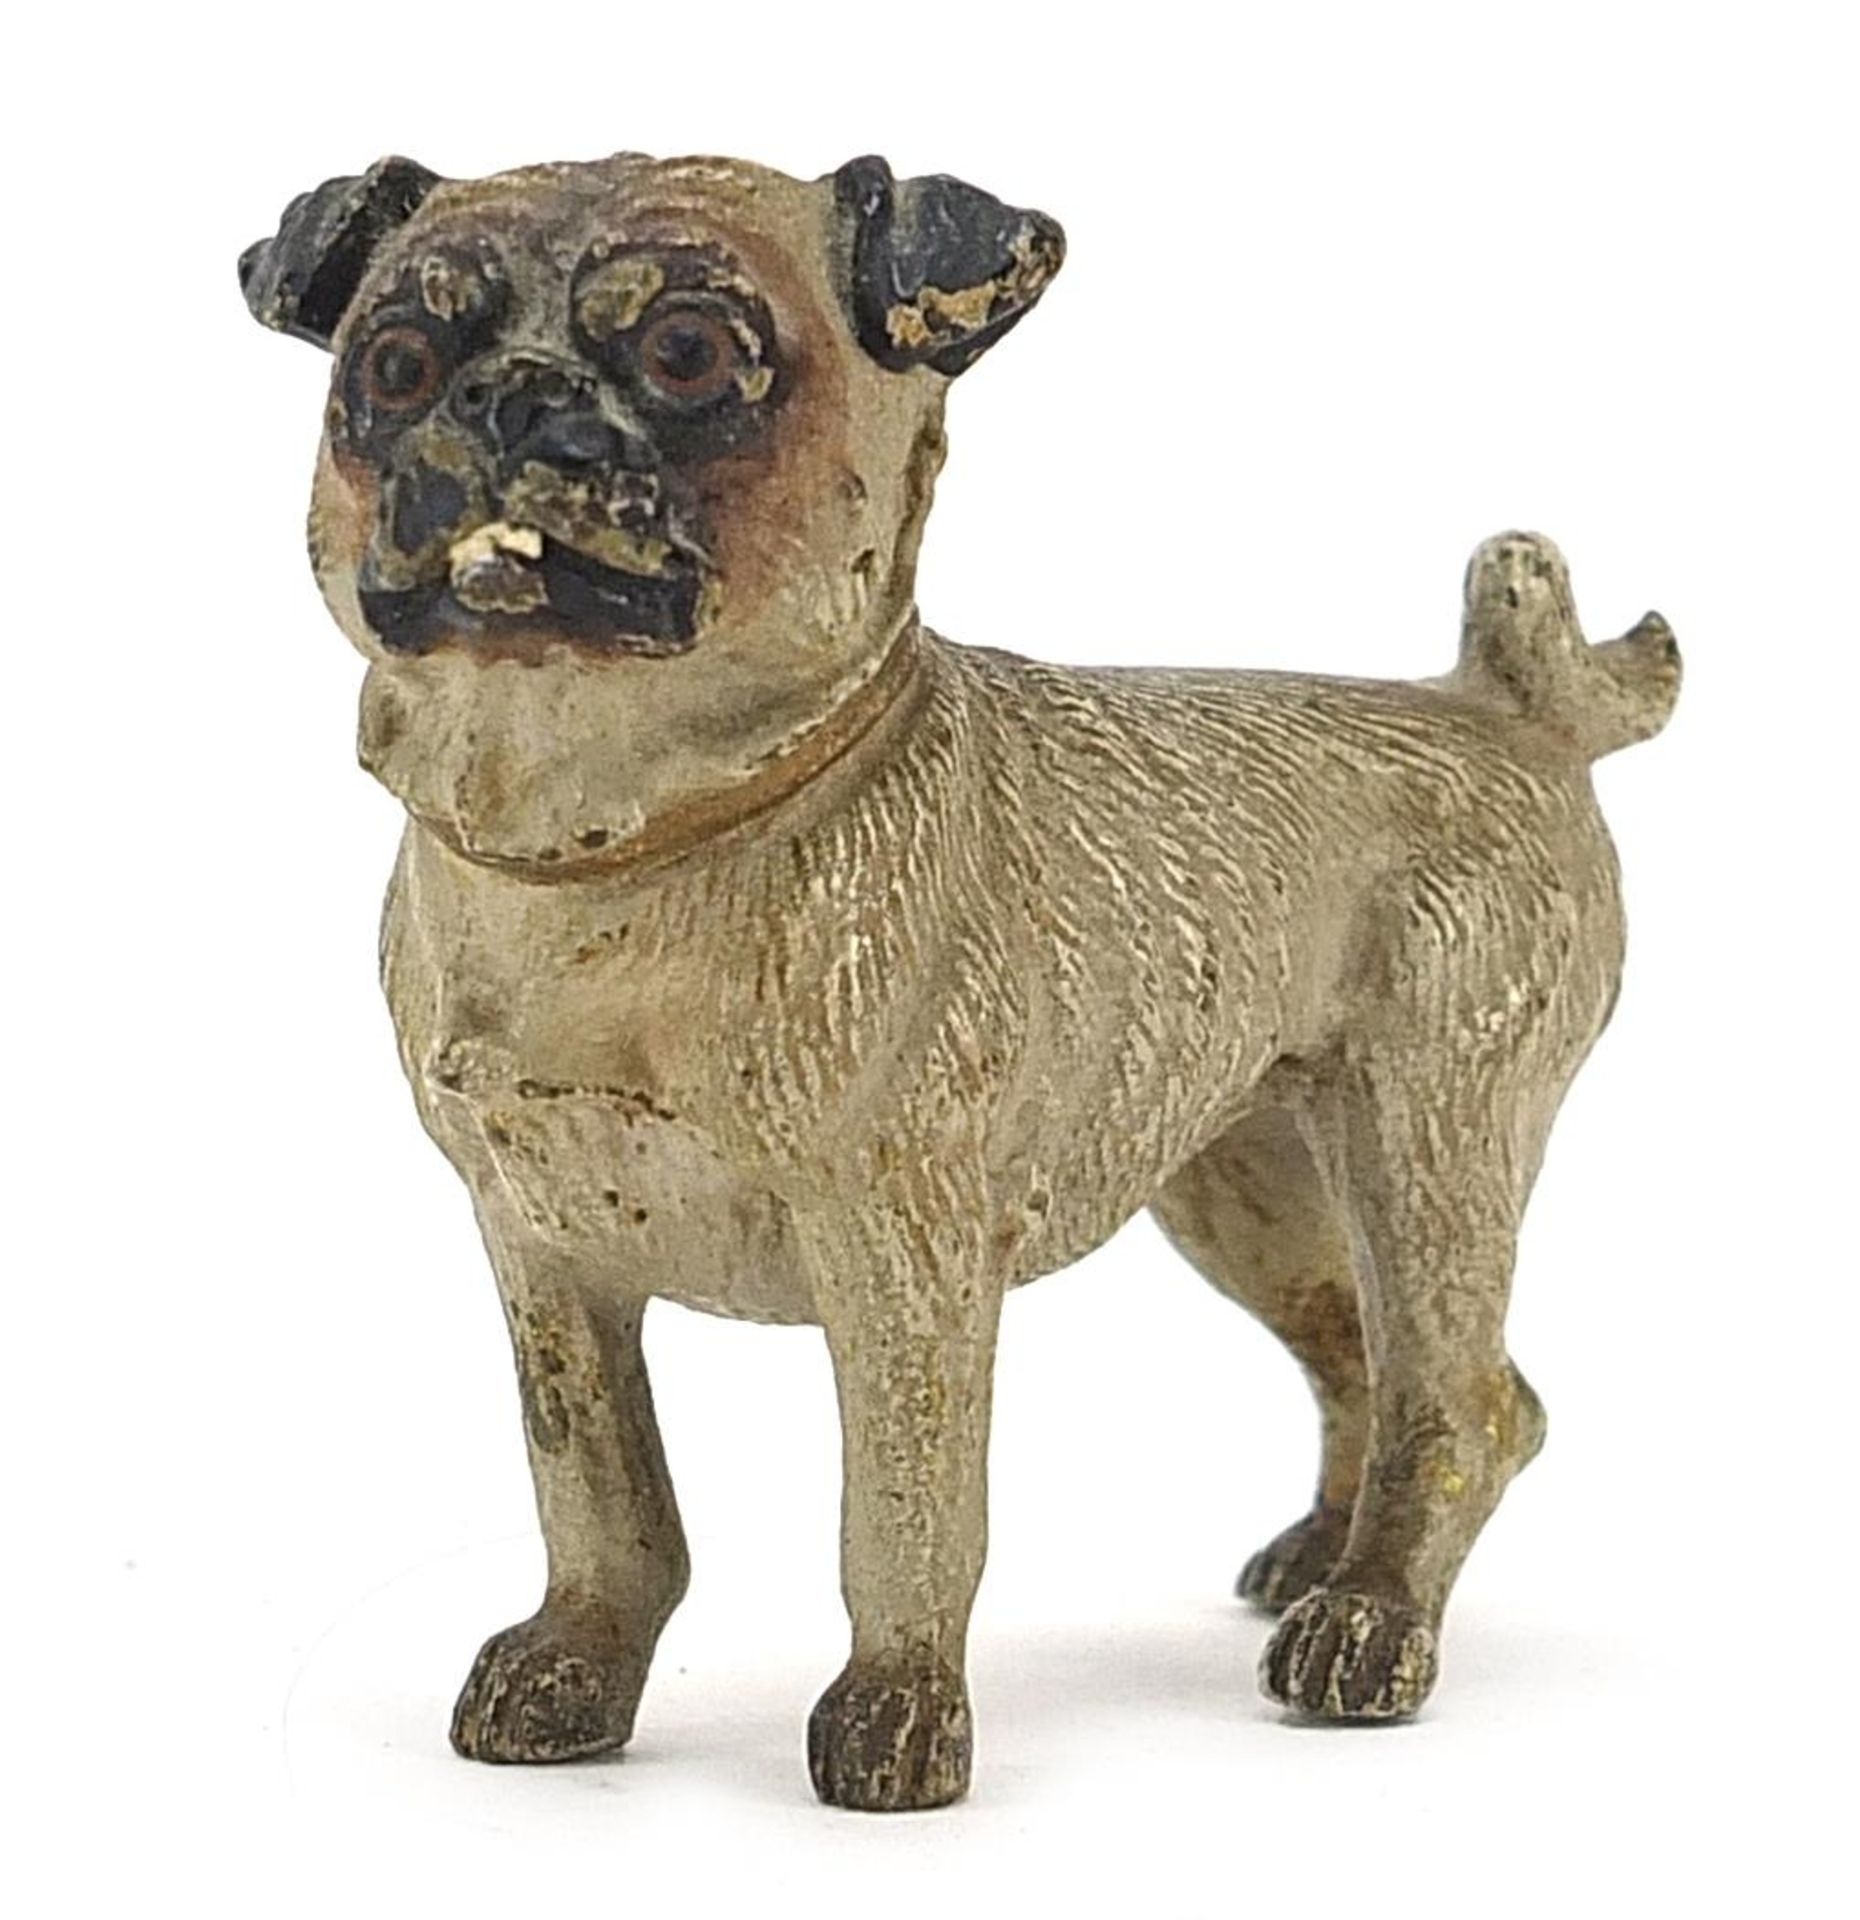 Cold painted bronze Pug dog, 5cm in length